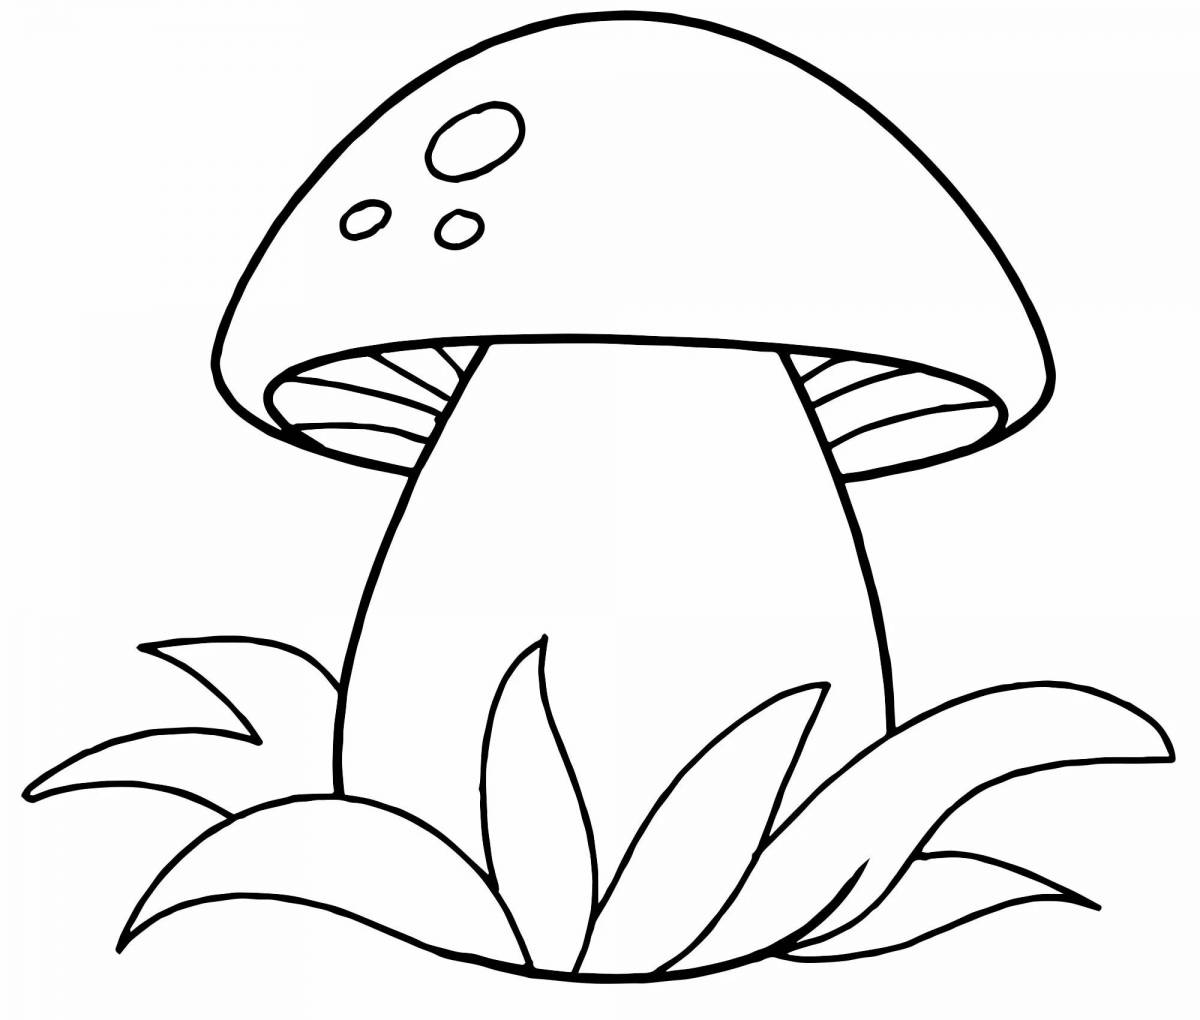 Colored explosive fungus coloring book for kids